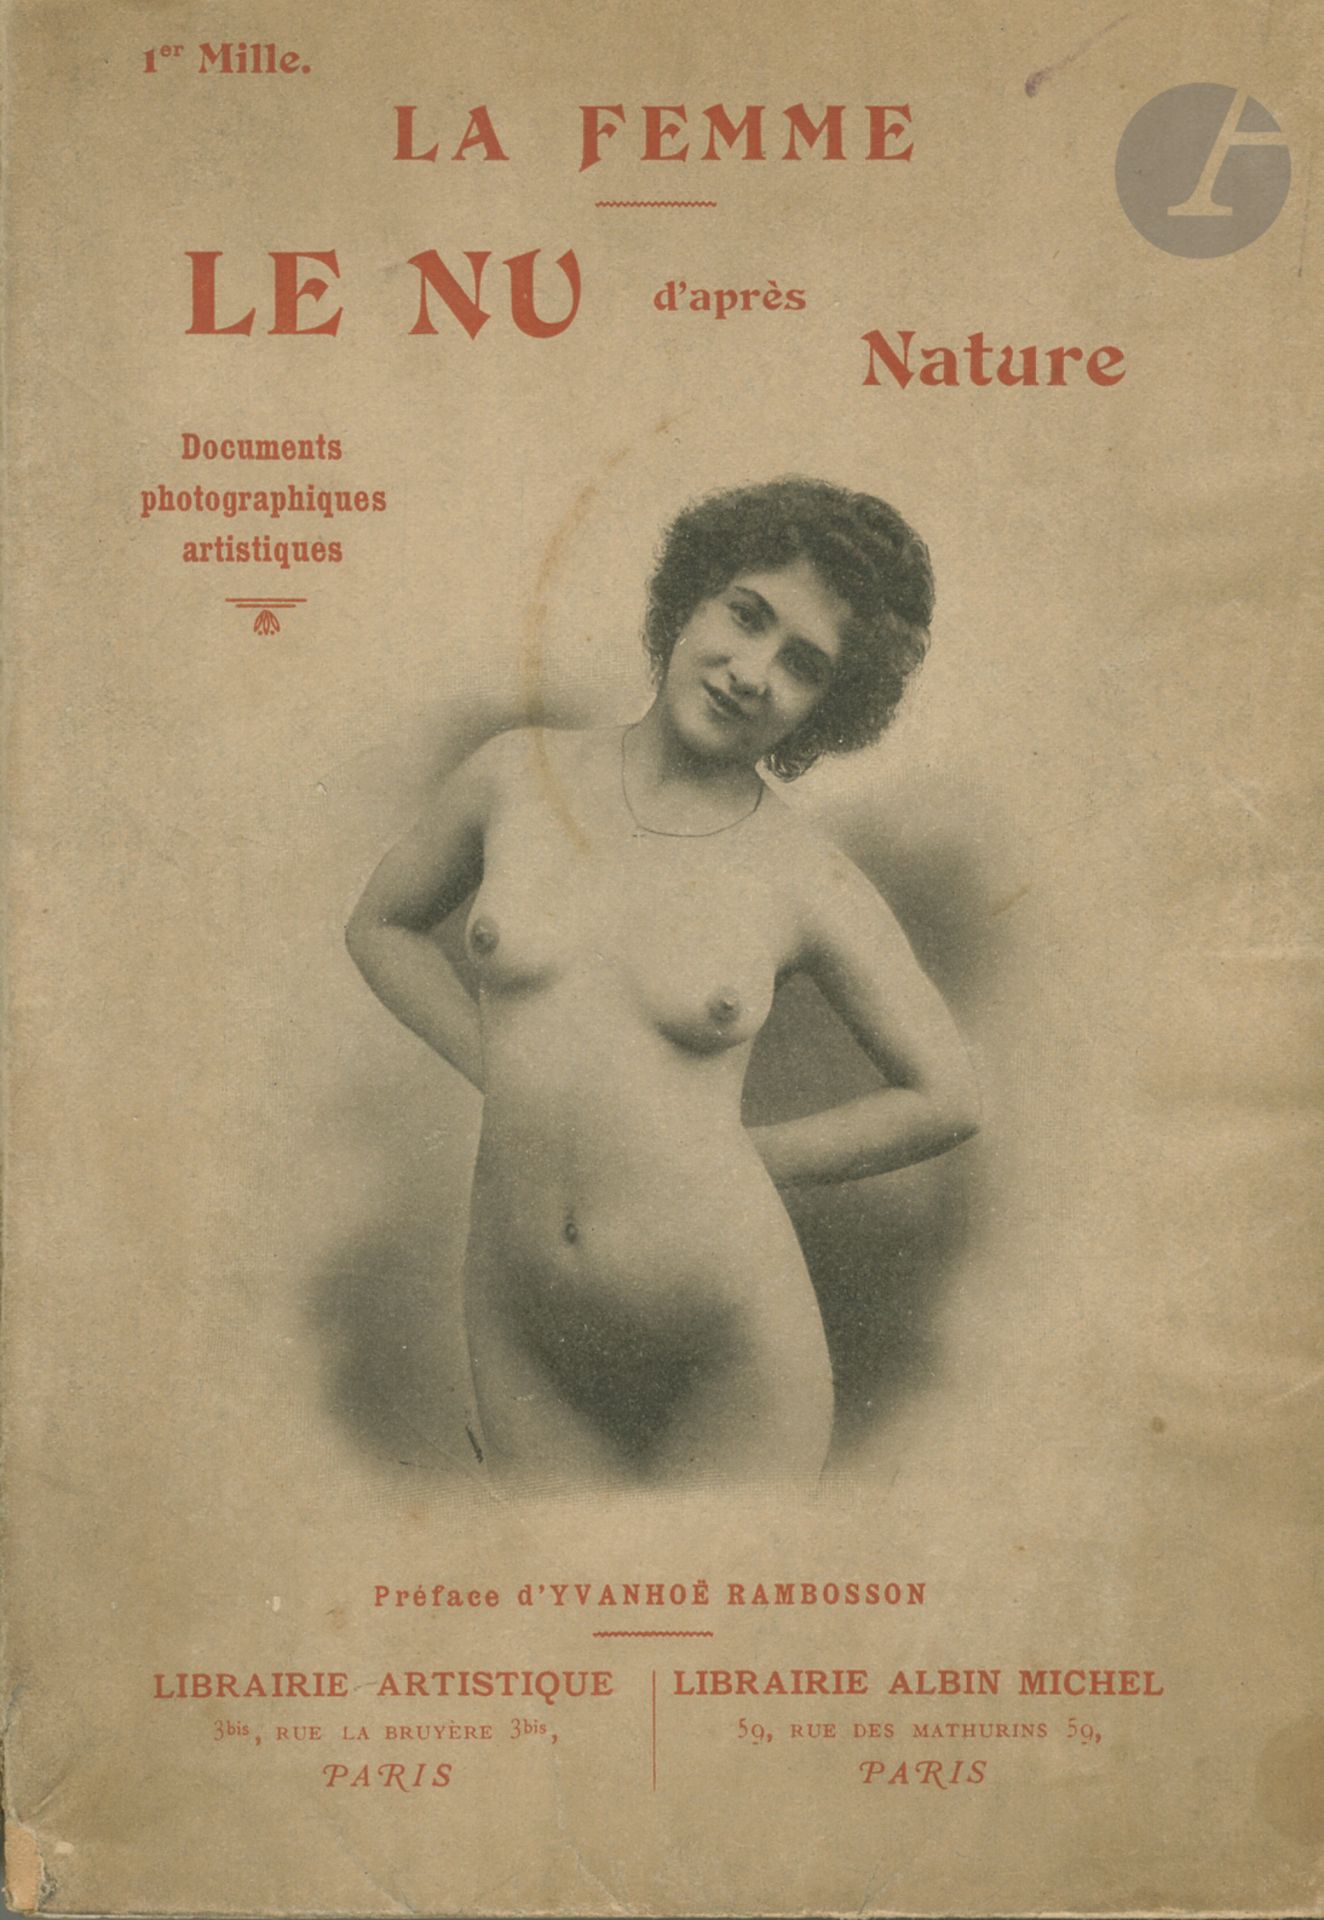 Null NUDE - THE BEAUTY OF THE WOMAN2
volumes.
The Nude from Nature. The Woman. 
&hellip;